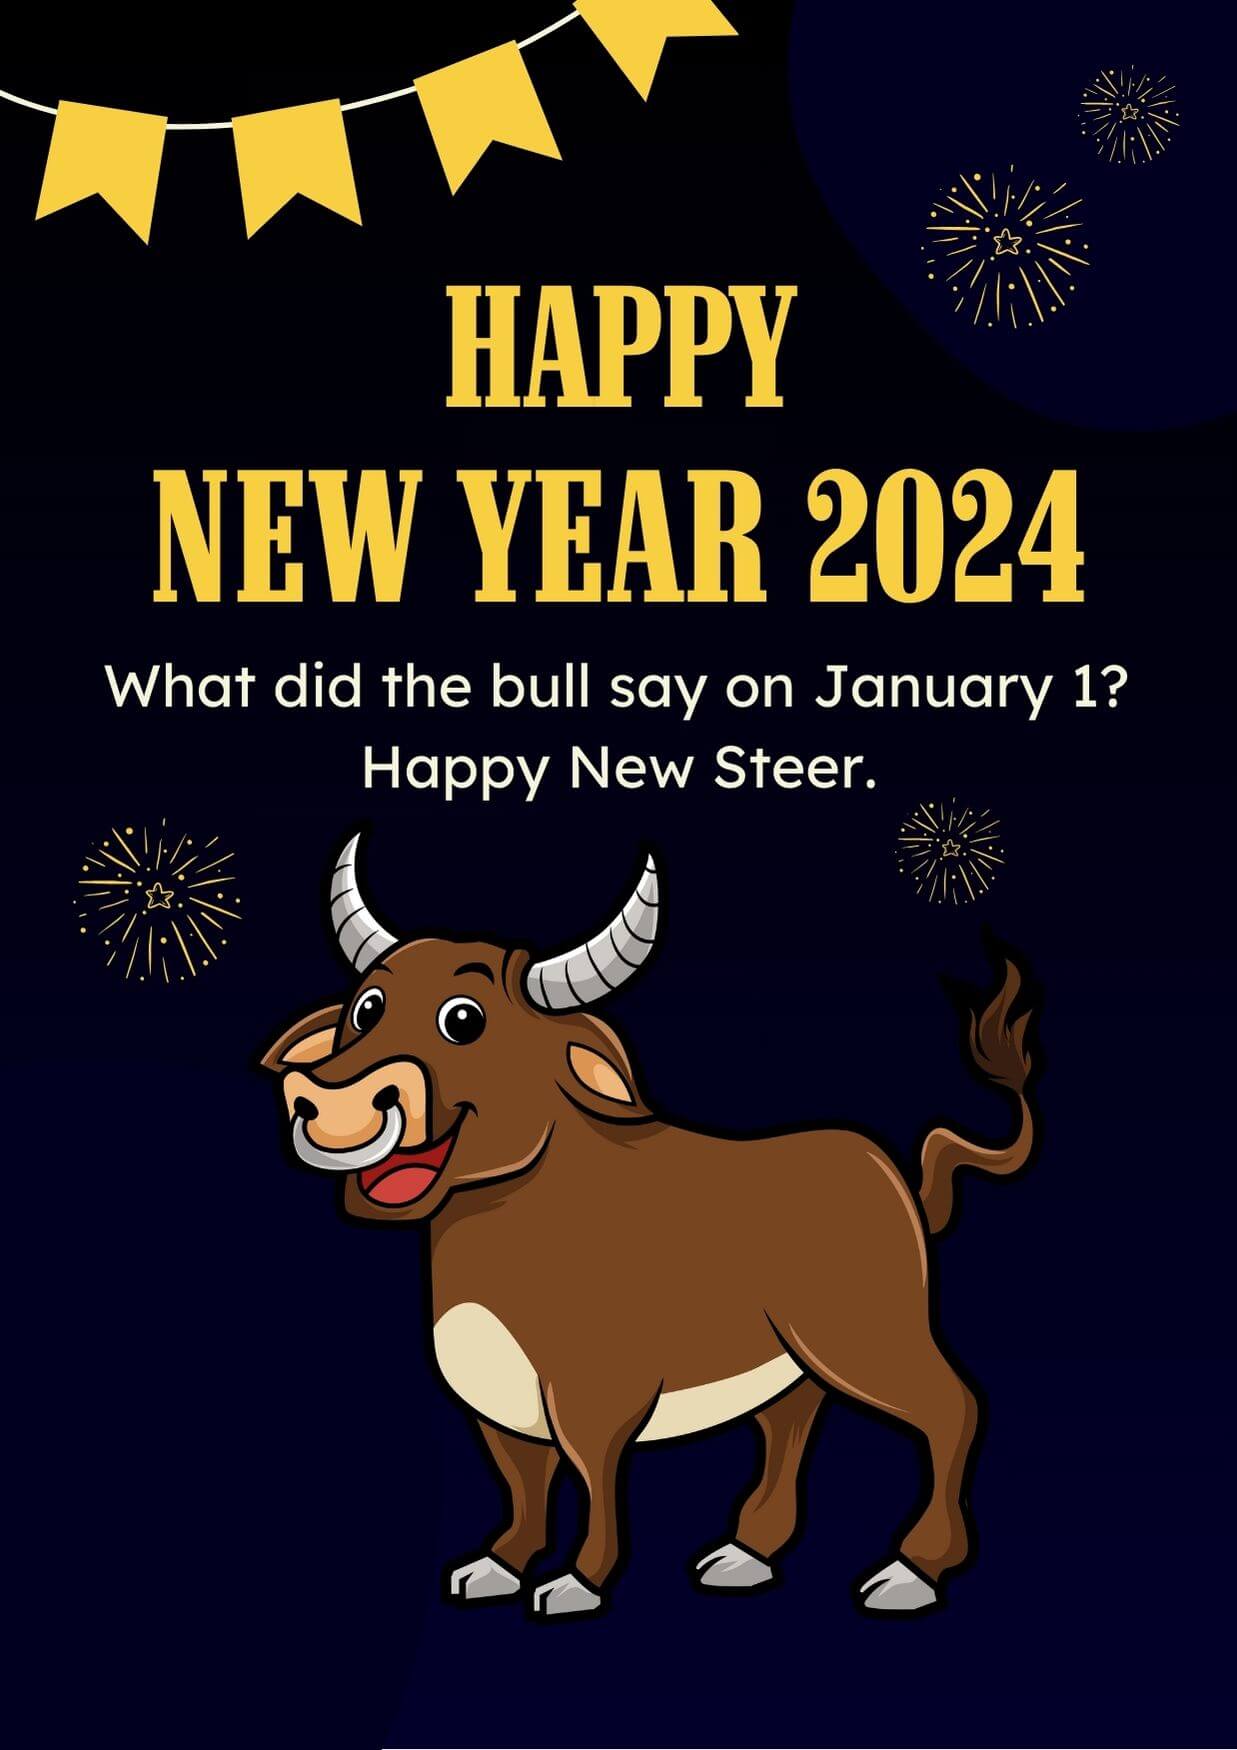 Funny New Year 2024 Jokes To Share On Facebook And Twitter